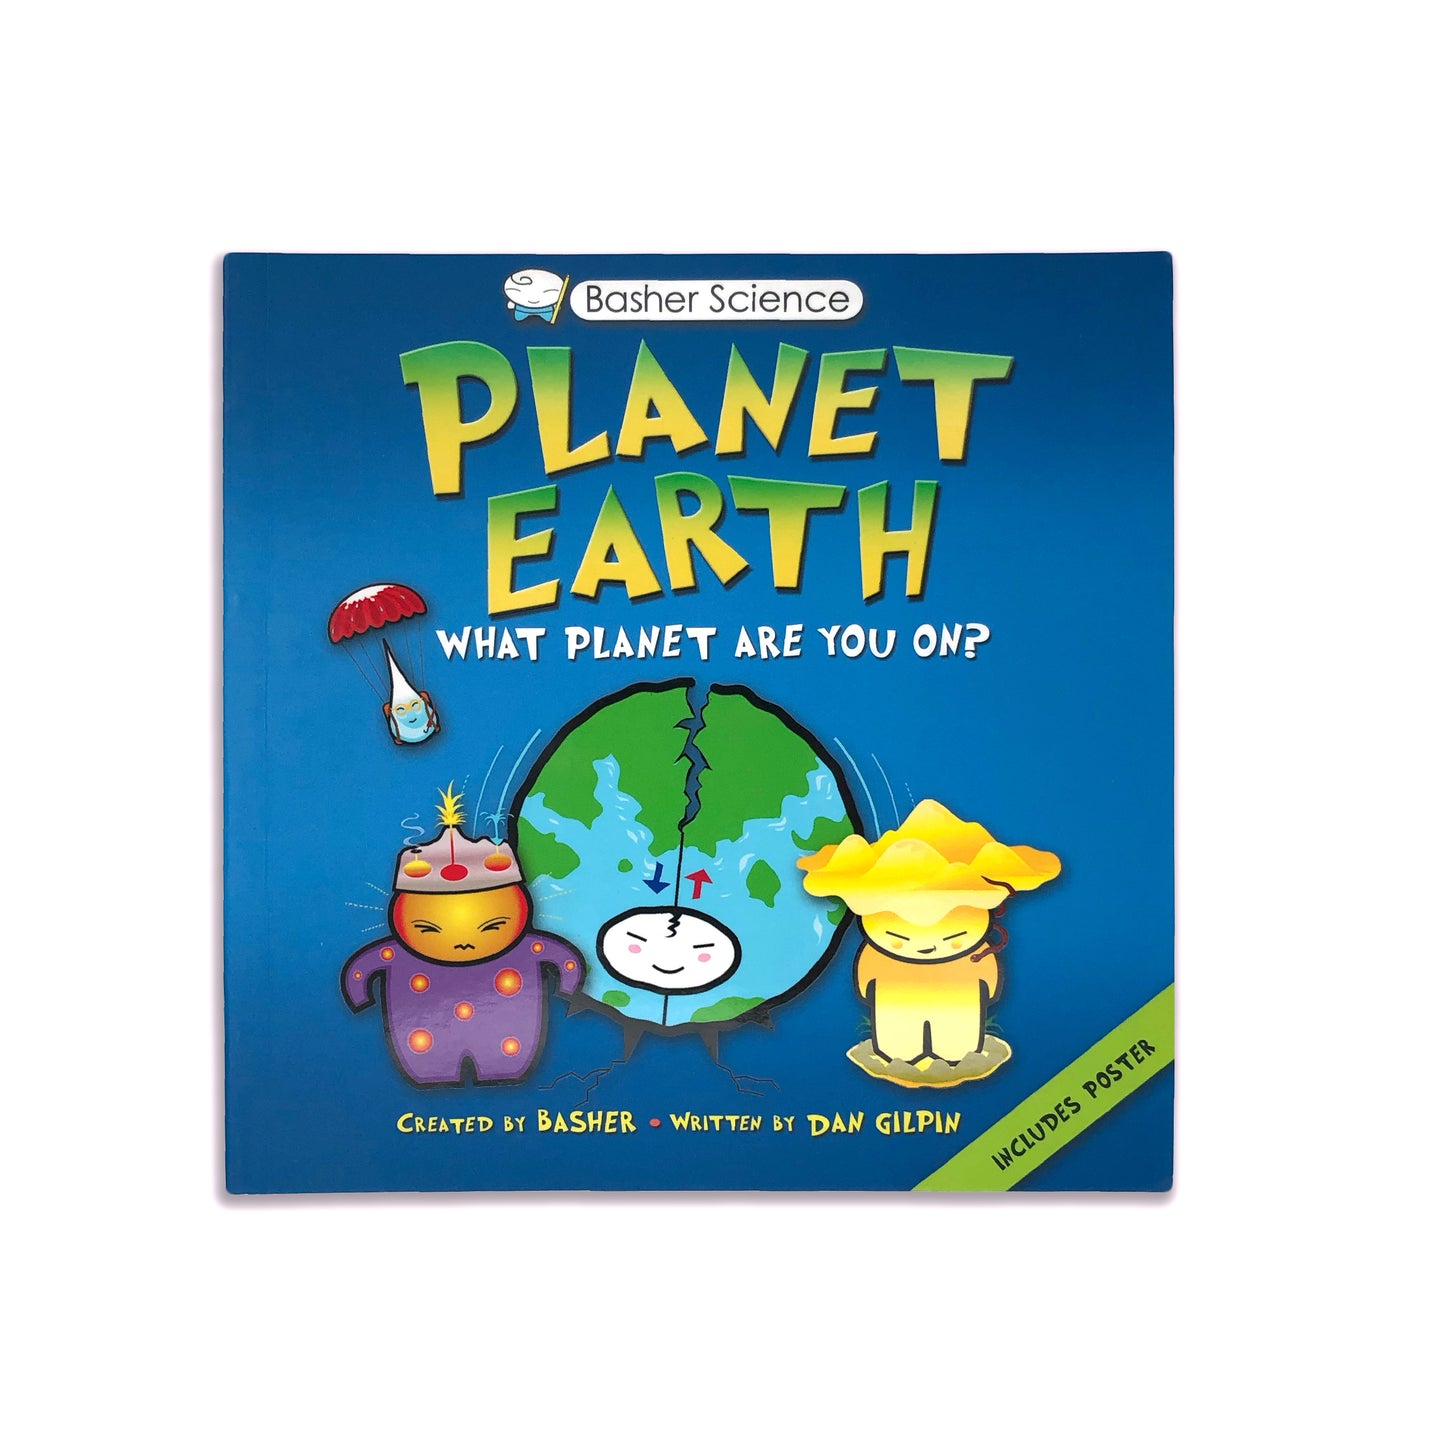 Plant Earth: What Planet Are You On? - Dan Gilpin and Basher Science (paperback)